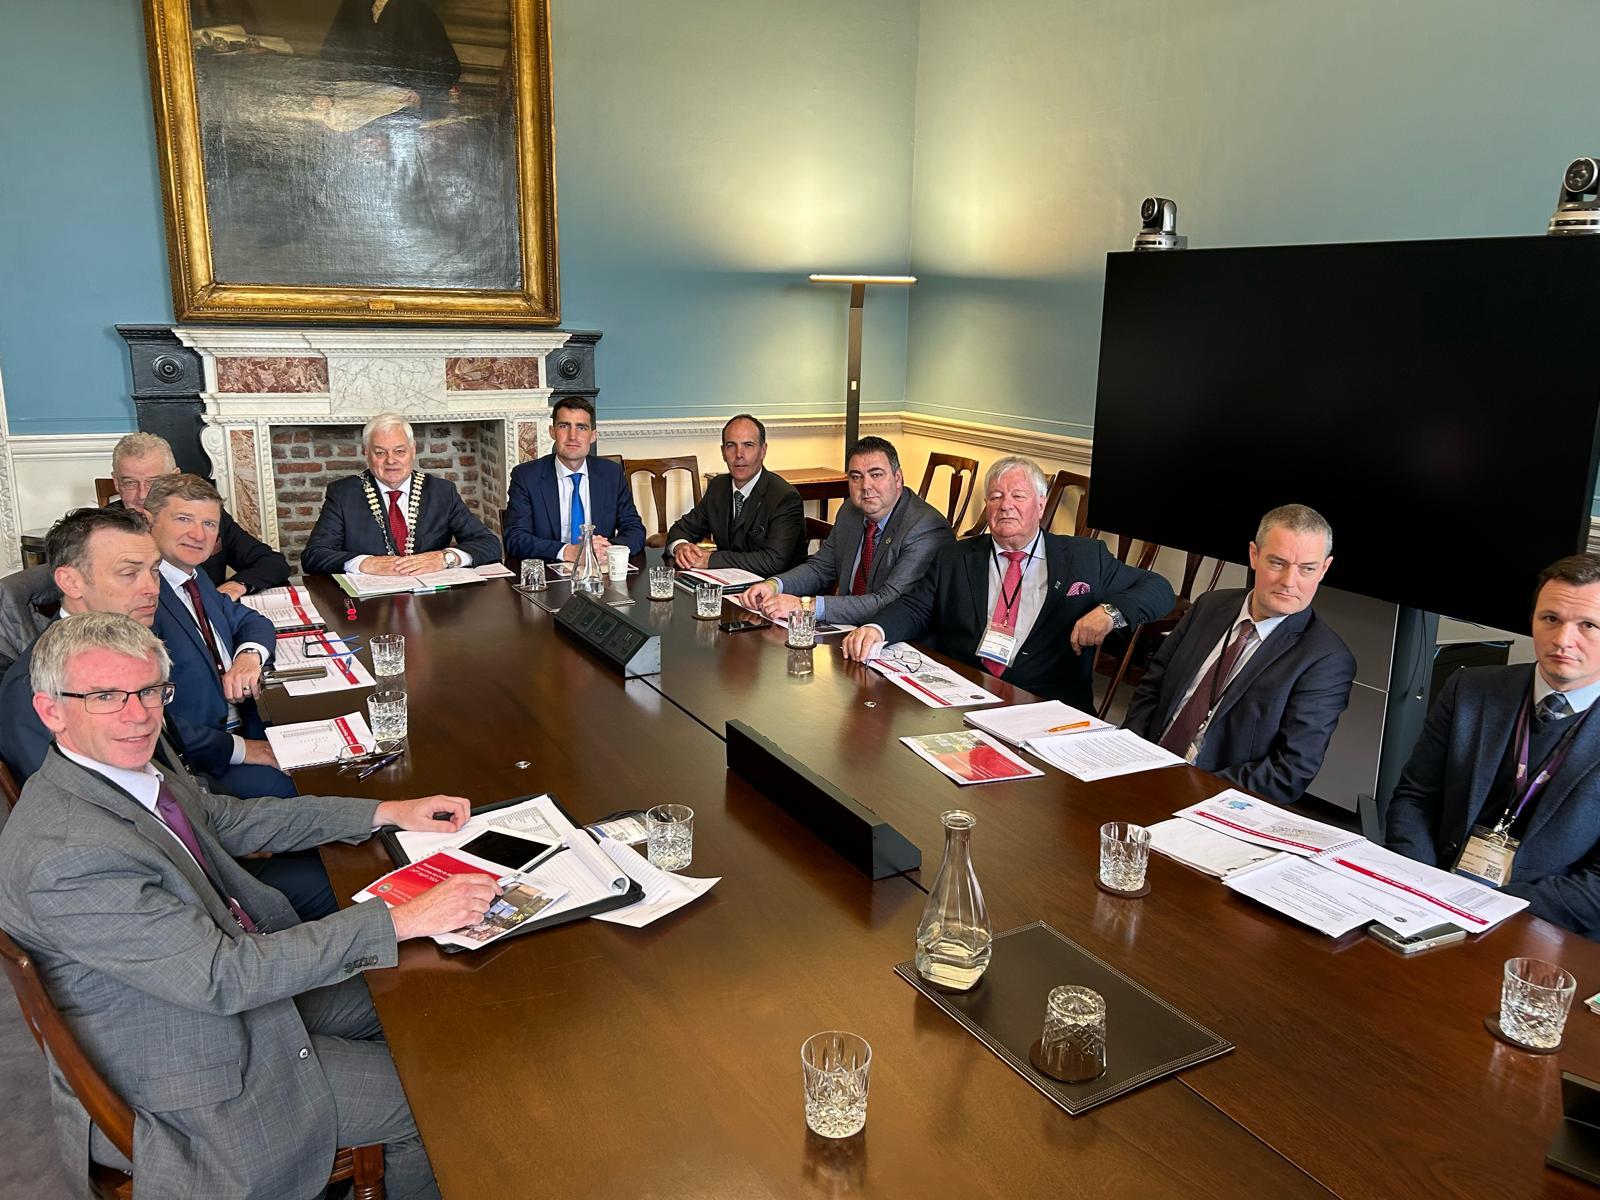 Mayor of the County of Cork, Cllr. Frank O'Flynn meeting with Minsiter of Transport, Jack Chambers TD at Leinster House, accompanied by a delegation from Cork County Council.